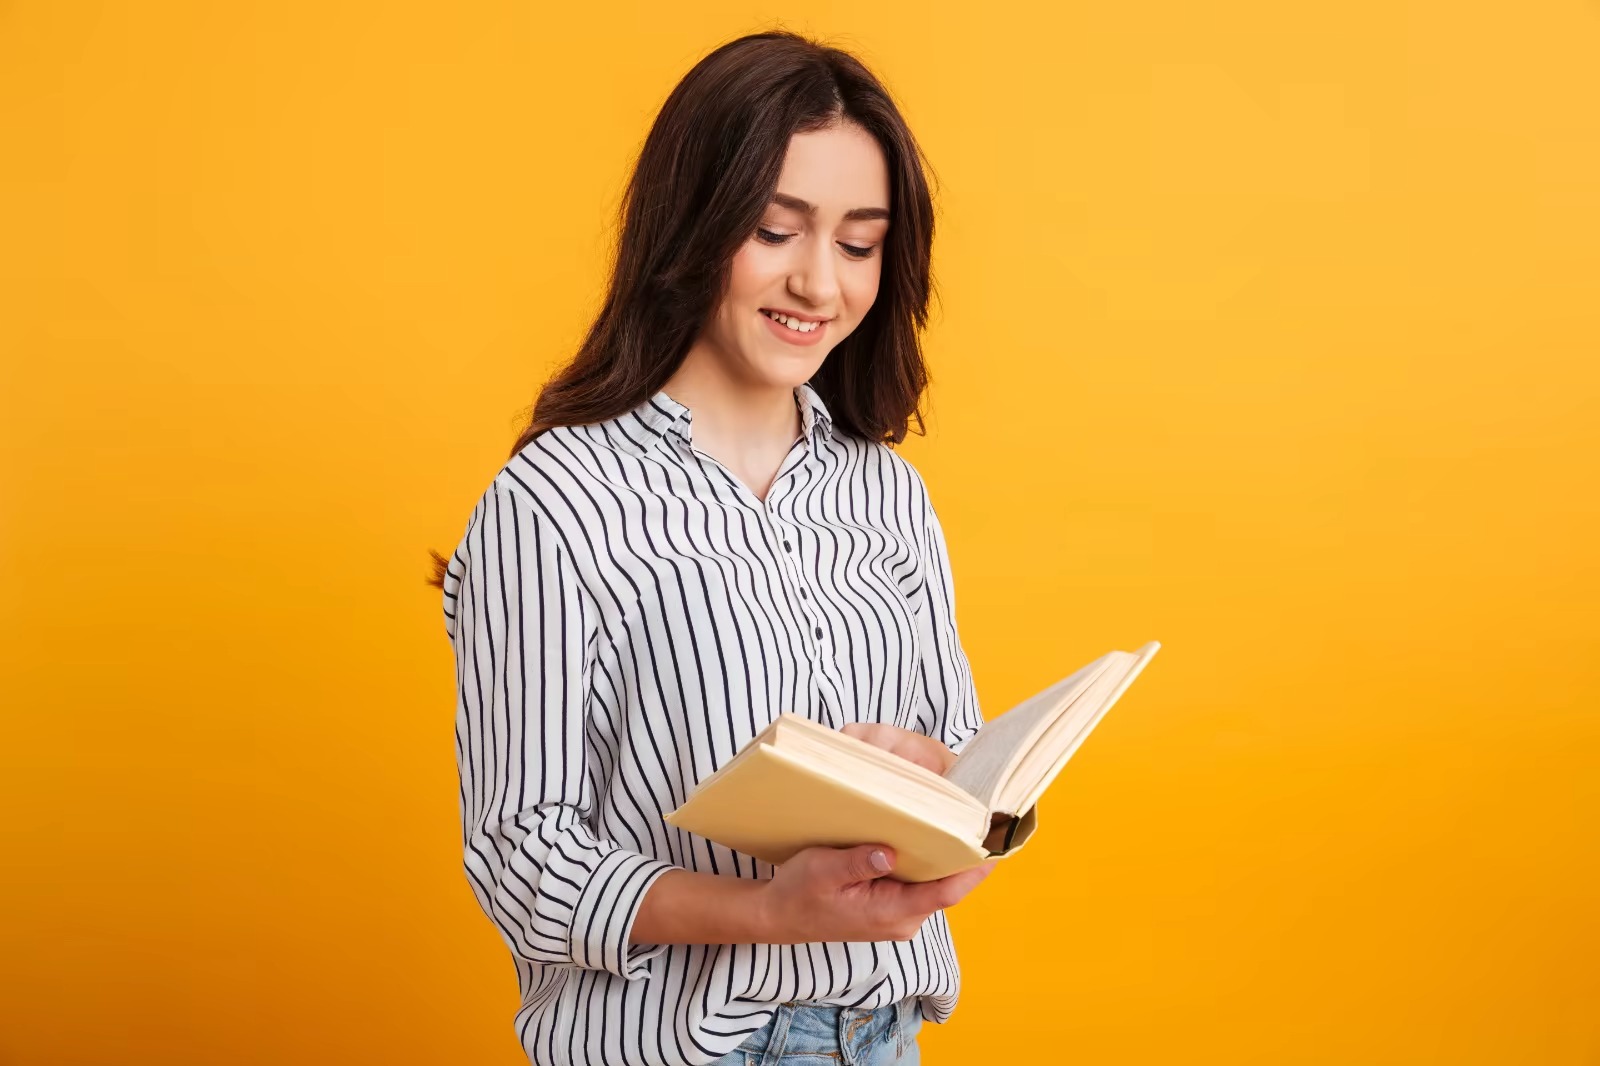  A lovely woman reading a book while glowing and feeling motivated